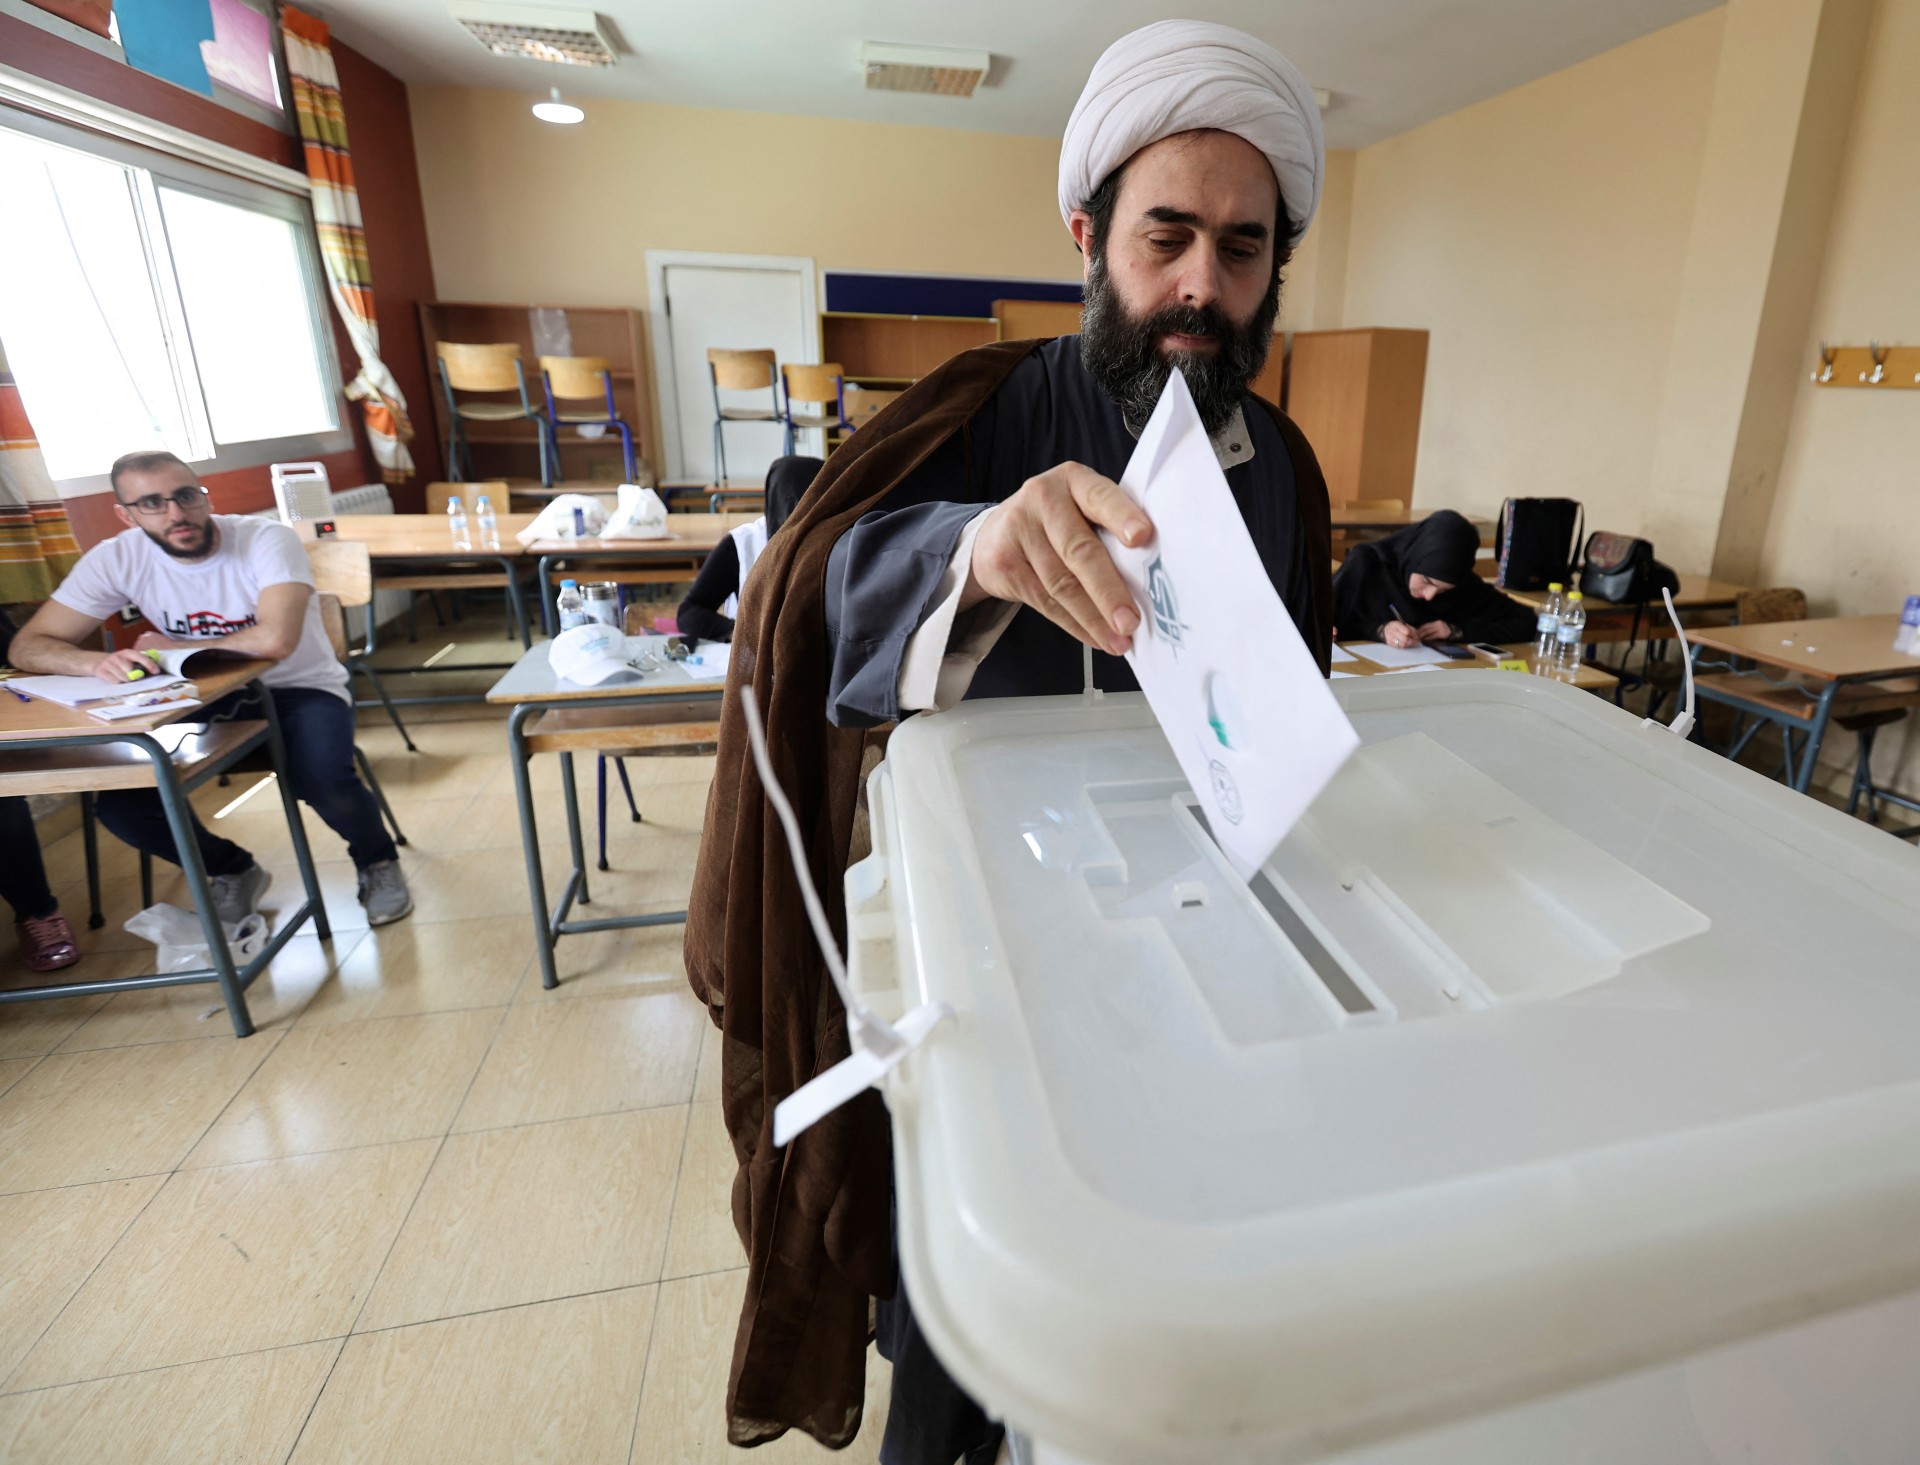 A muslim cleric casts his vote at a polling station, during the parliamentary election, in Khiam, near the border with Israel, southern Lebanon (Reuters)